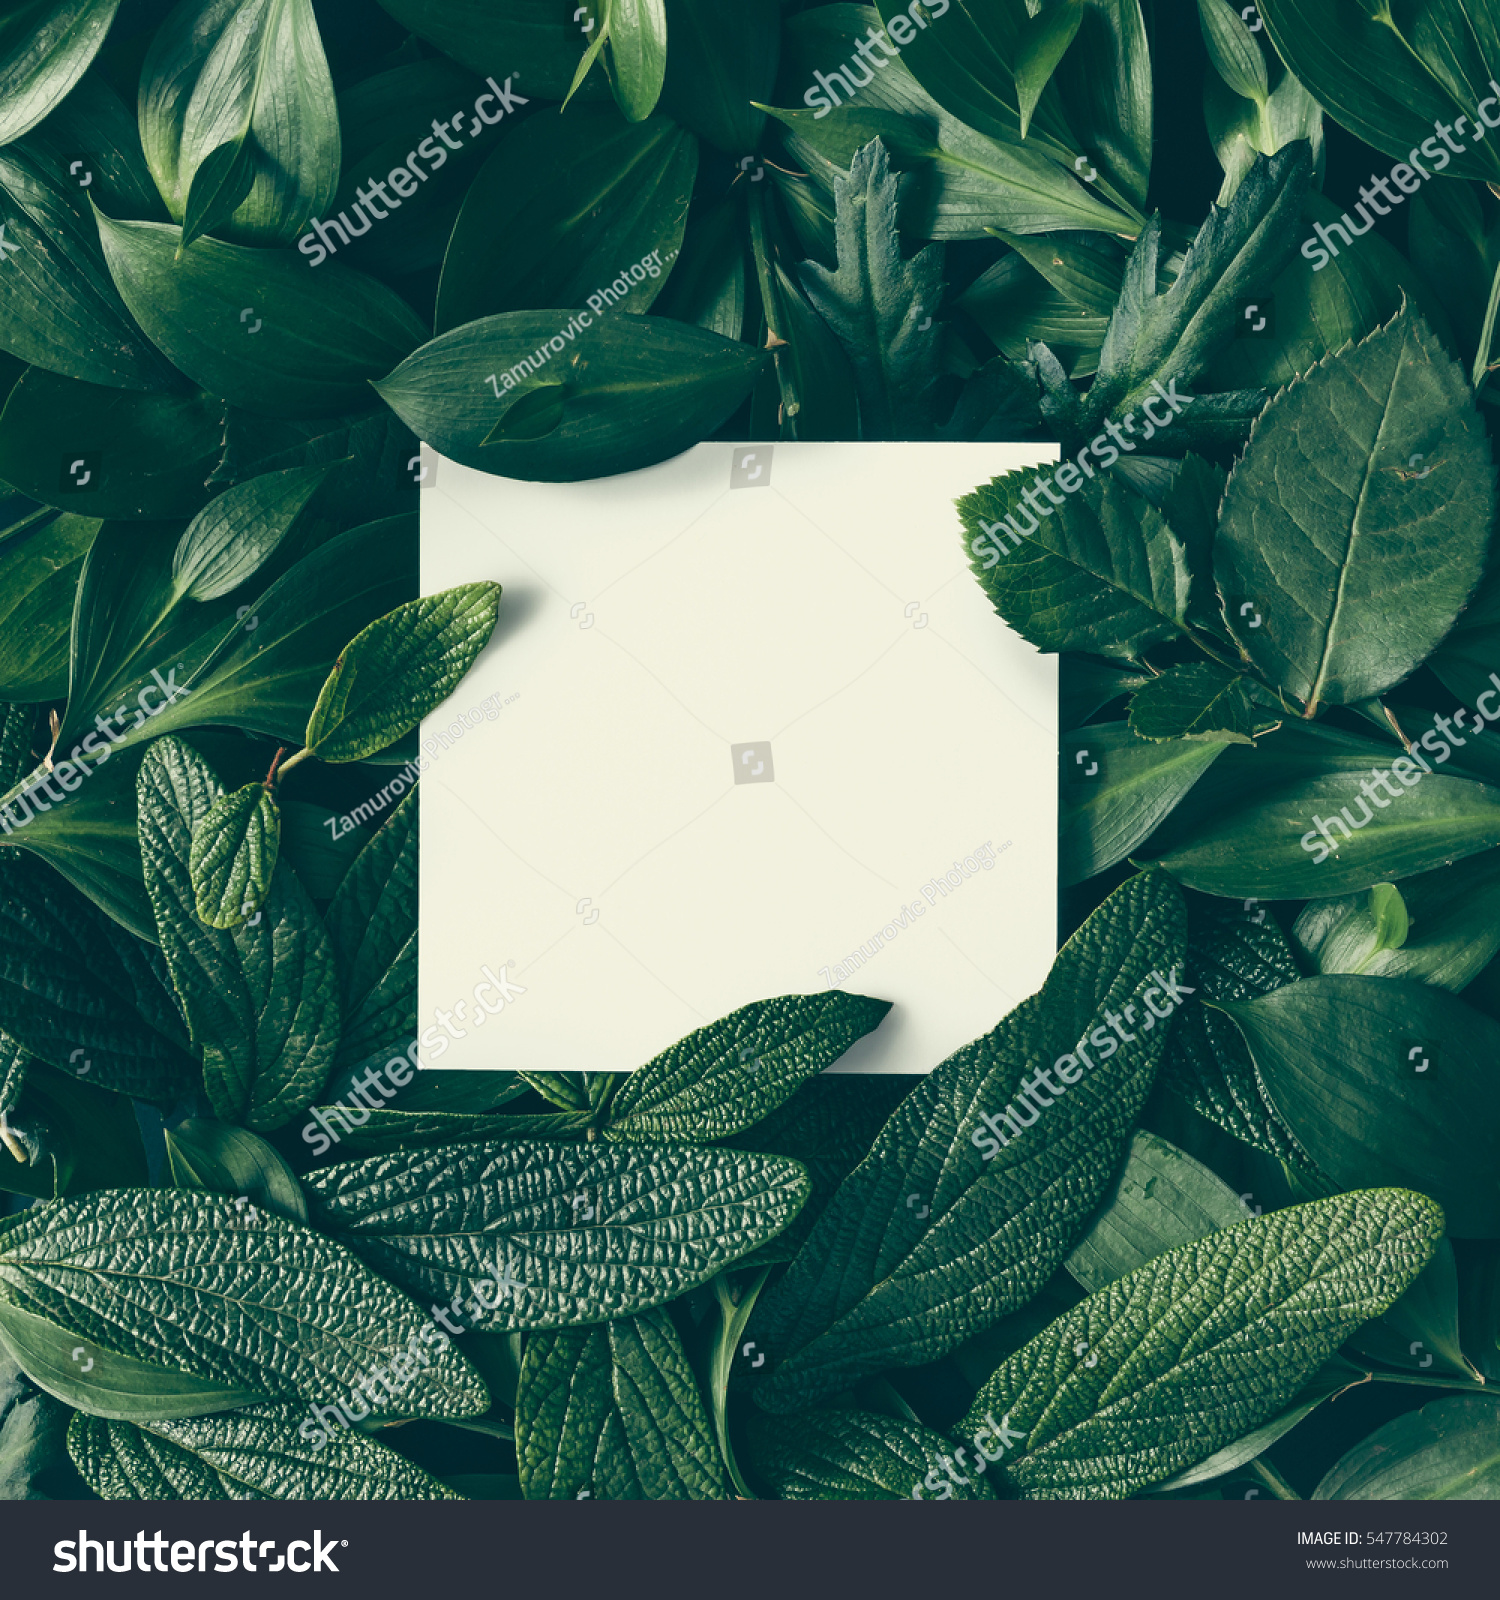 Creative layout made of flowers and leaves with paper card note. Flat lay. Nature concept #547784302